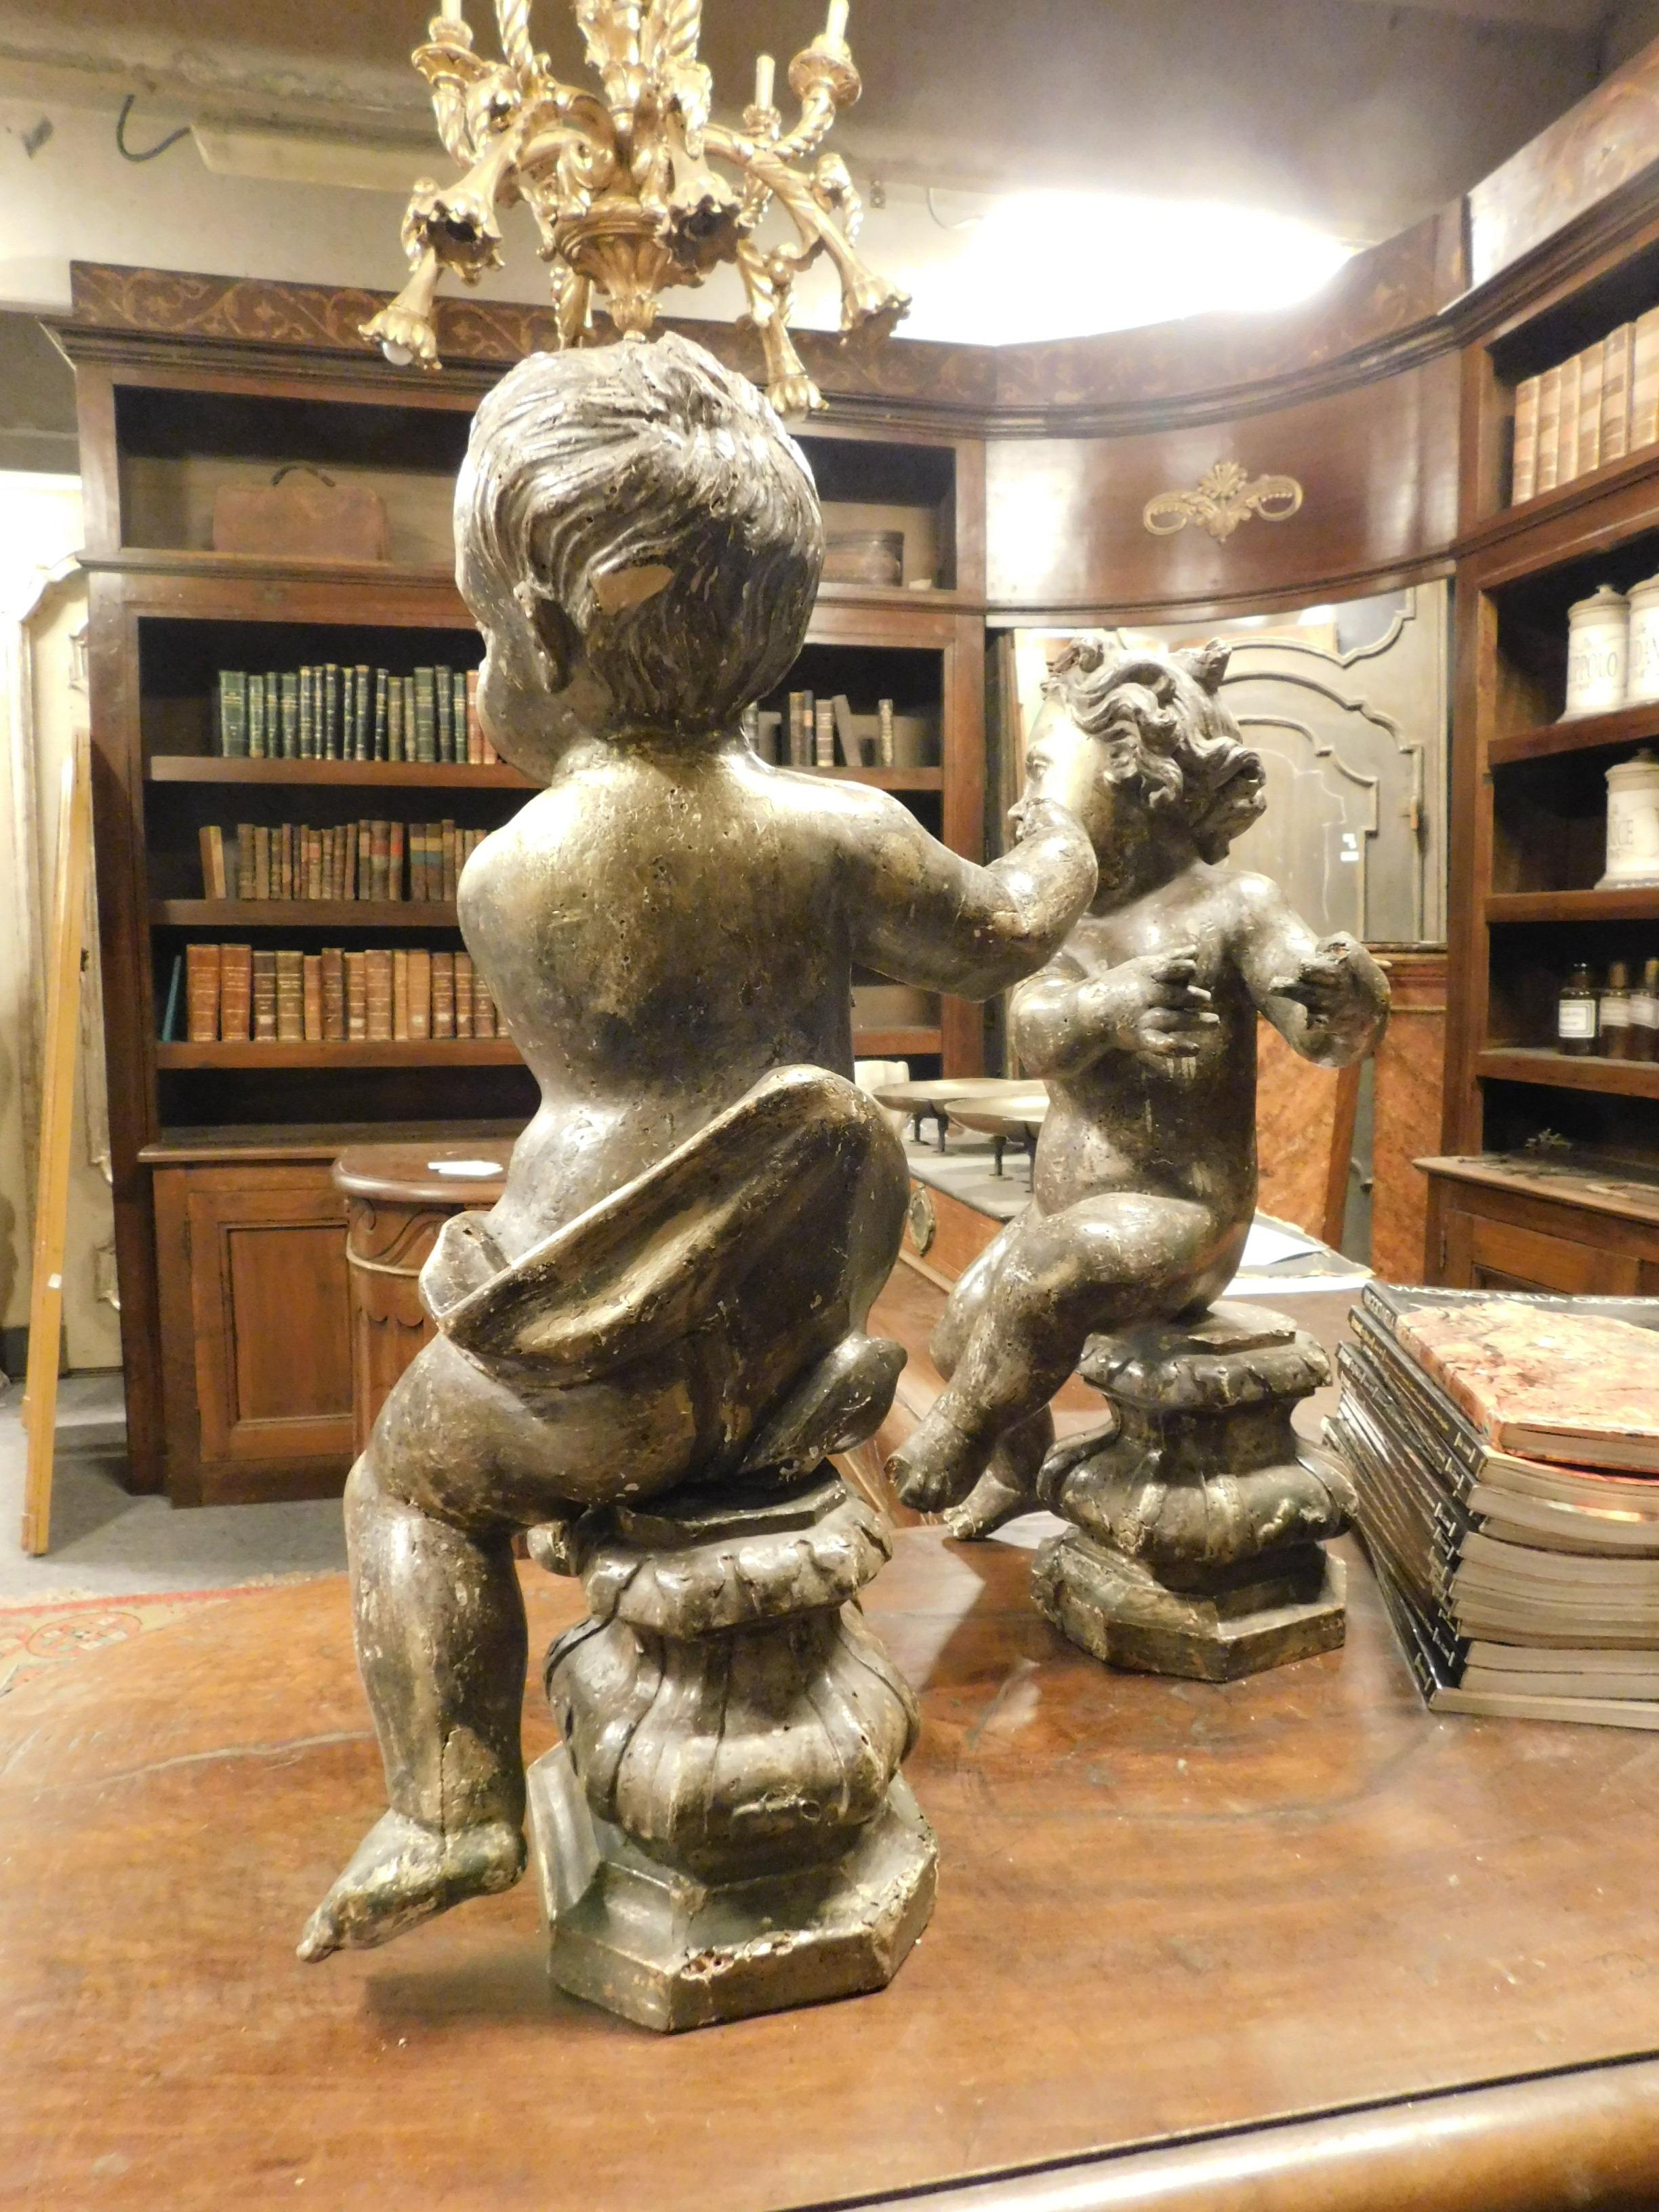 Antique Pair of Sculptures, Cherubs Silvered and Gilded Wood, 18th Century Italy 1